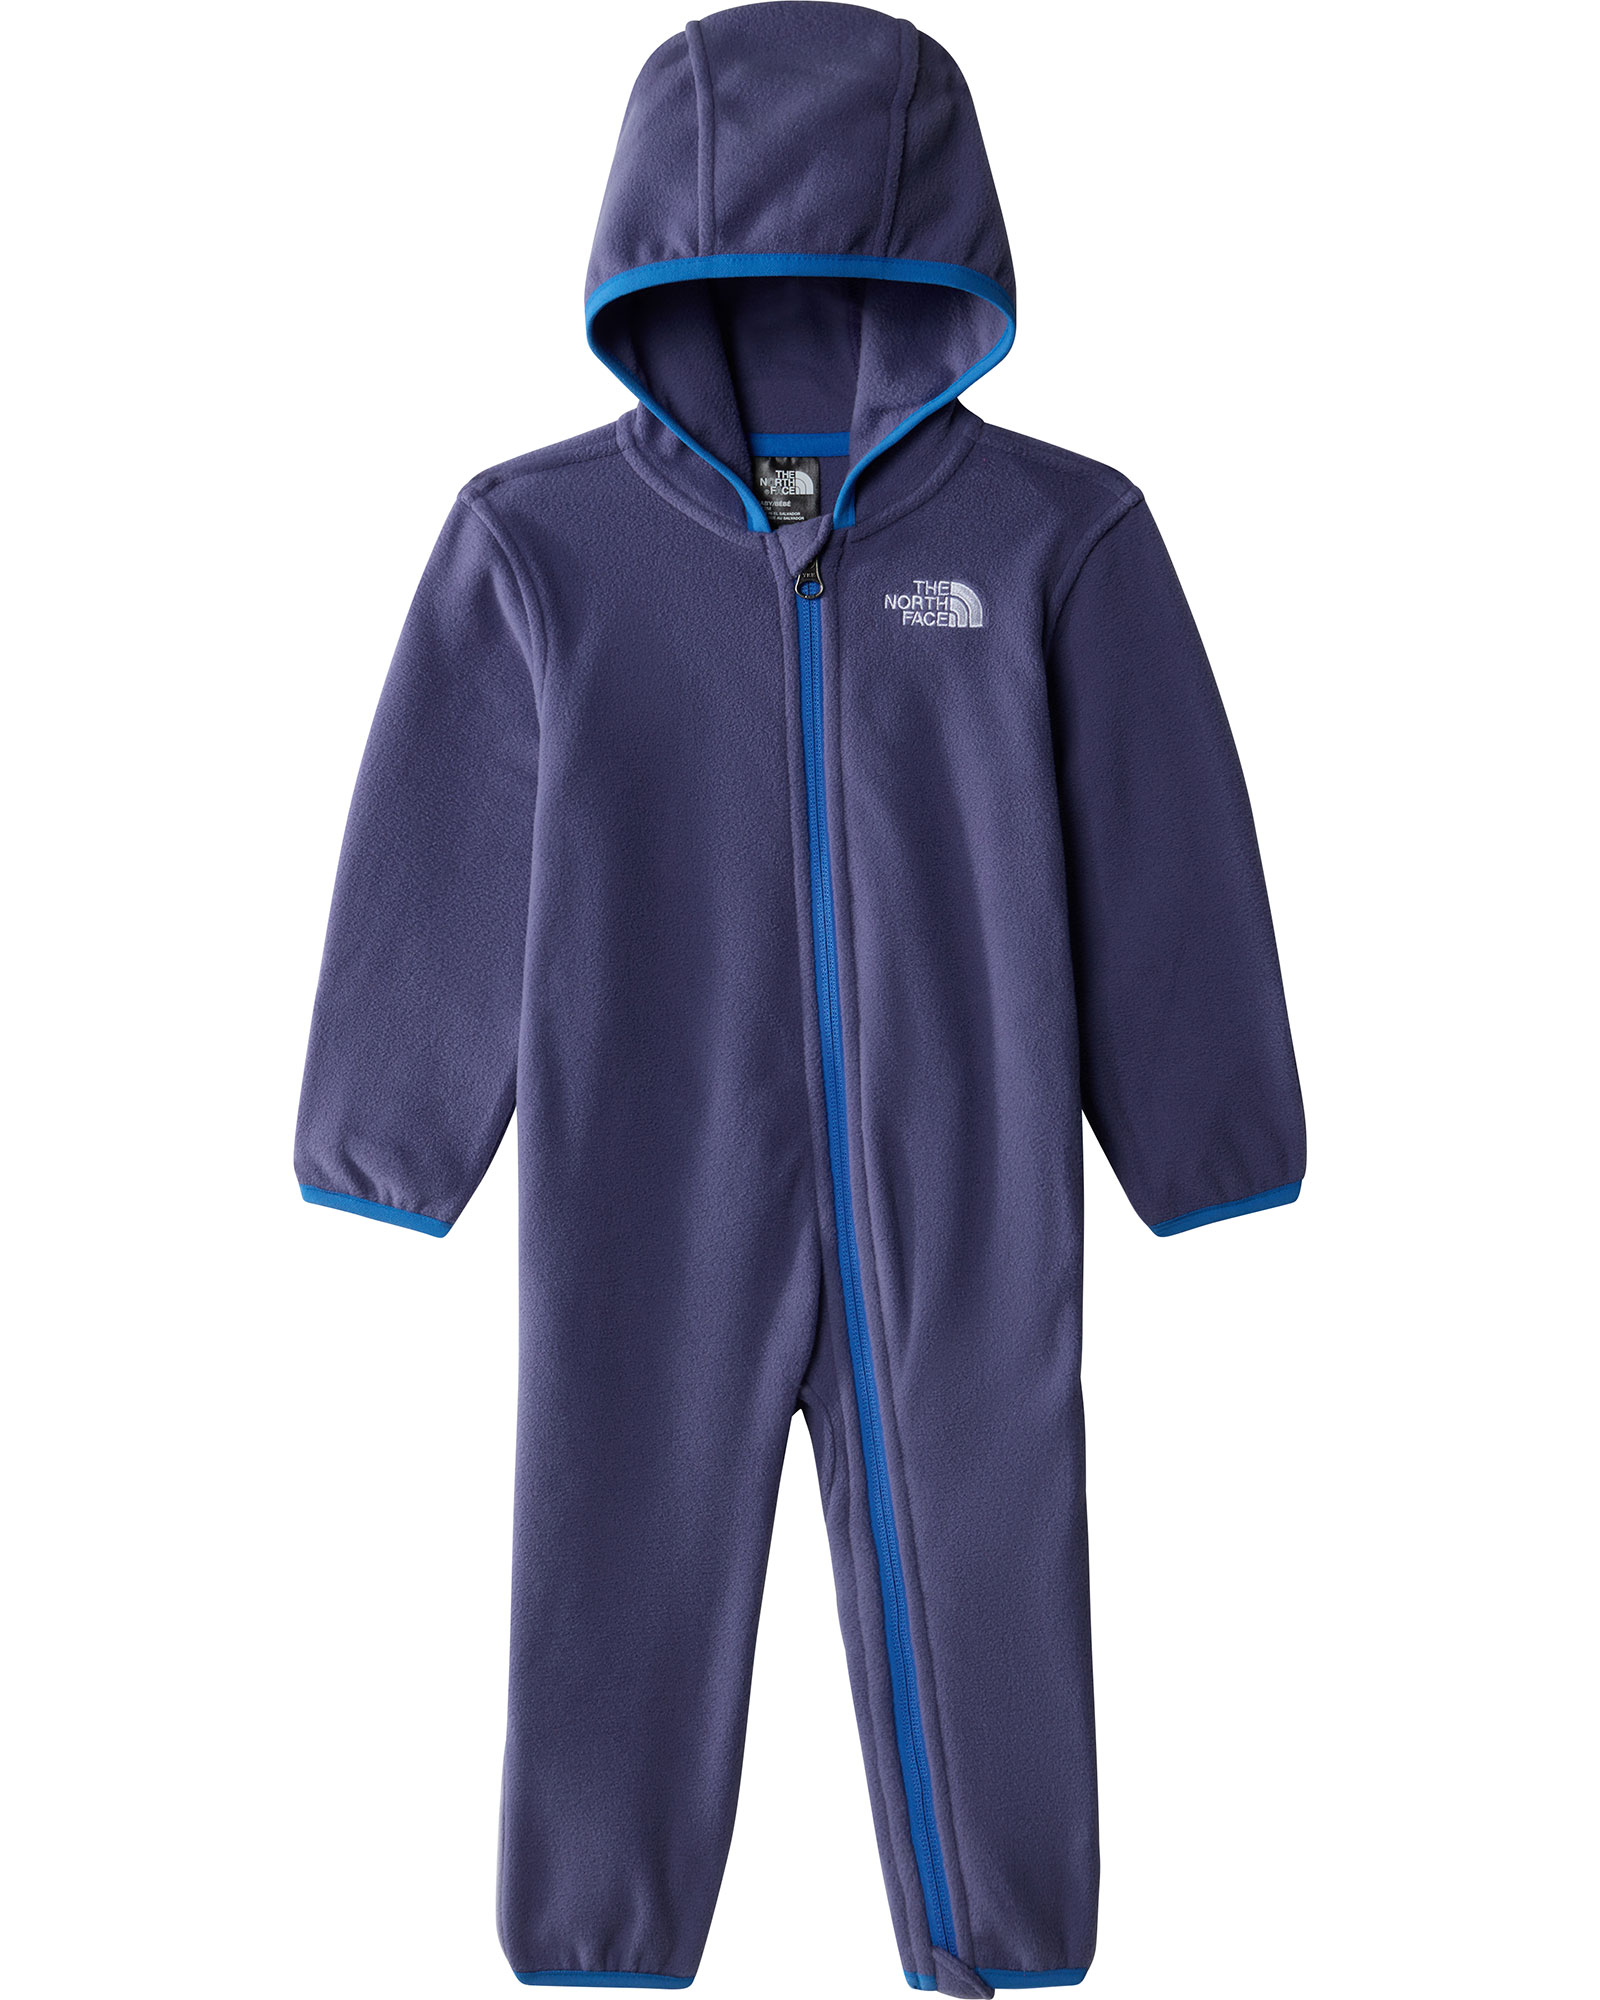 The North Face Baby Glacier One Piece - Cave Blue 24